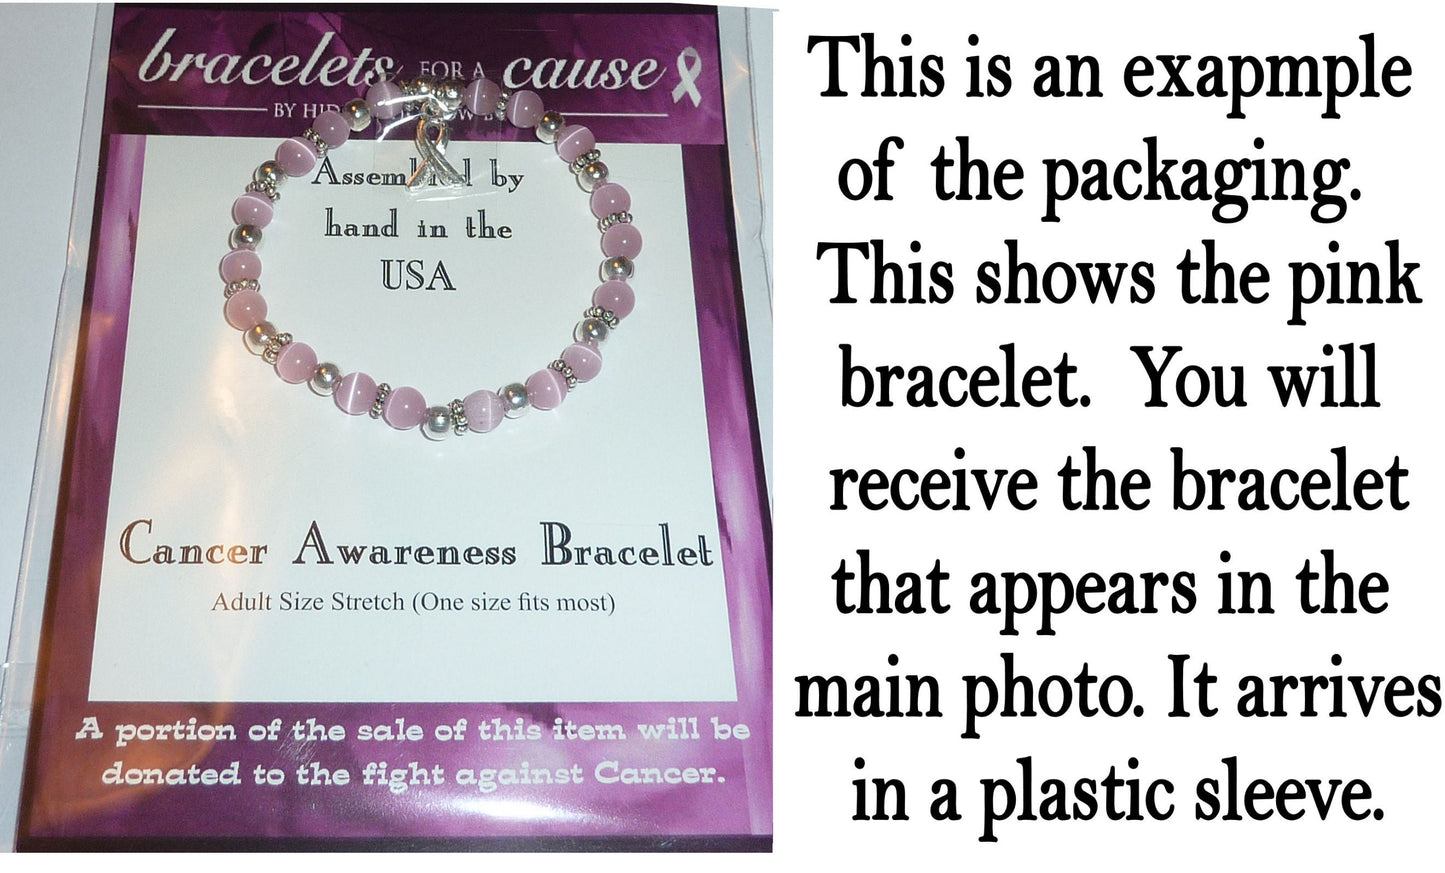 Pearl ( Lung Cancer ) Packaged Cancer Awareness Bracelet 6mm - Stretch (will stretch to fit most Adults)